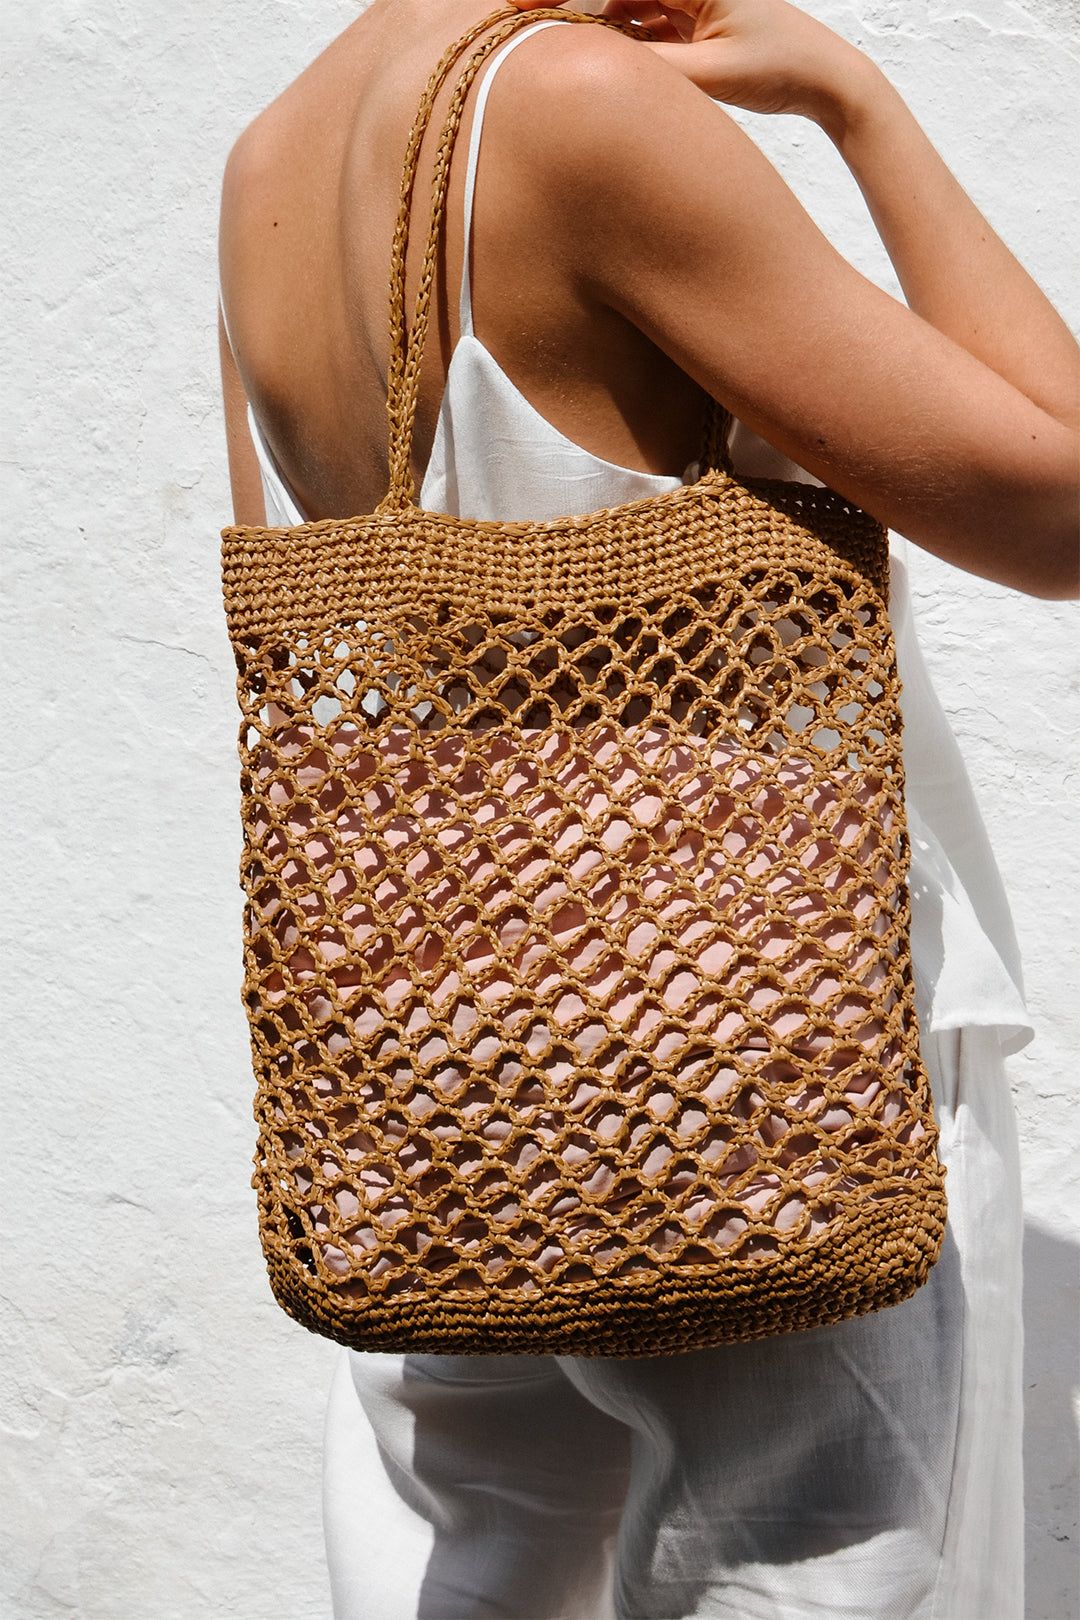 How to Style Straw Tote Bag: 15 Refreshing Outfit Ideas for Ladies